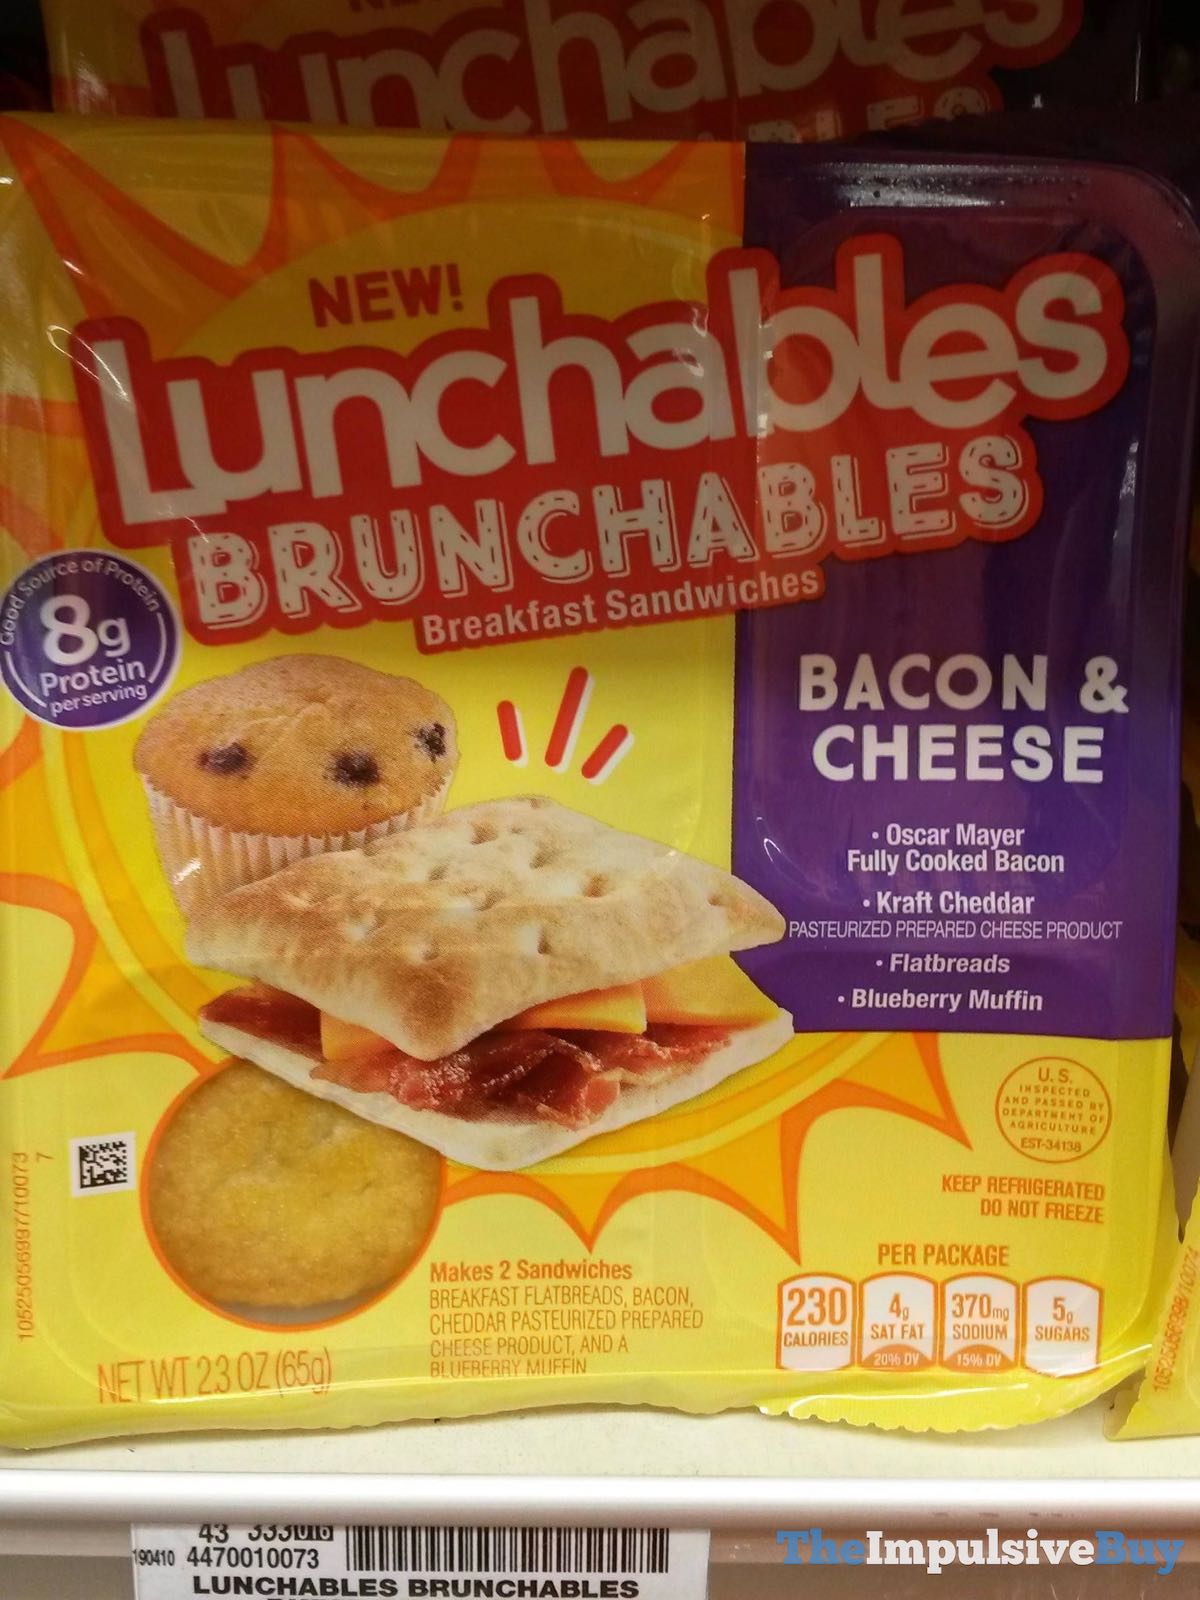 SPOTTED Lunchables Brunchables Breakfast Sandwiches The Impulsive Buy